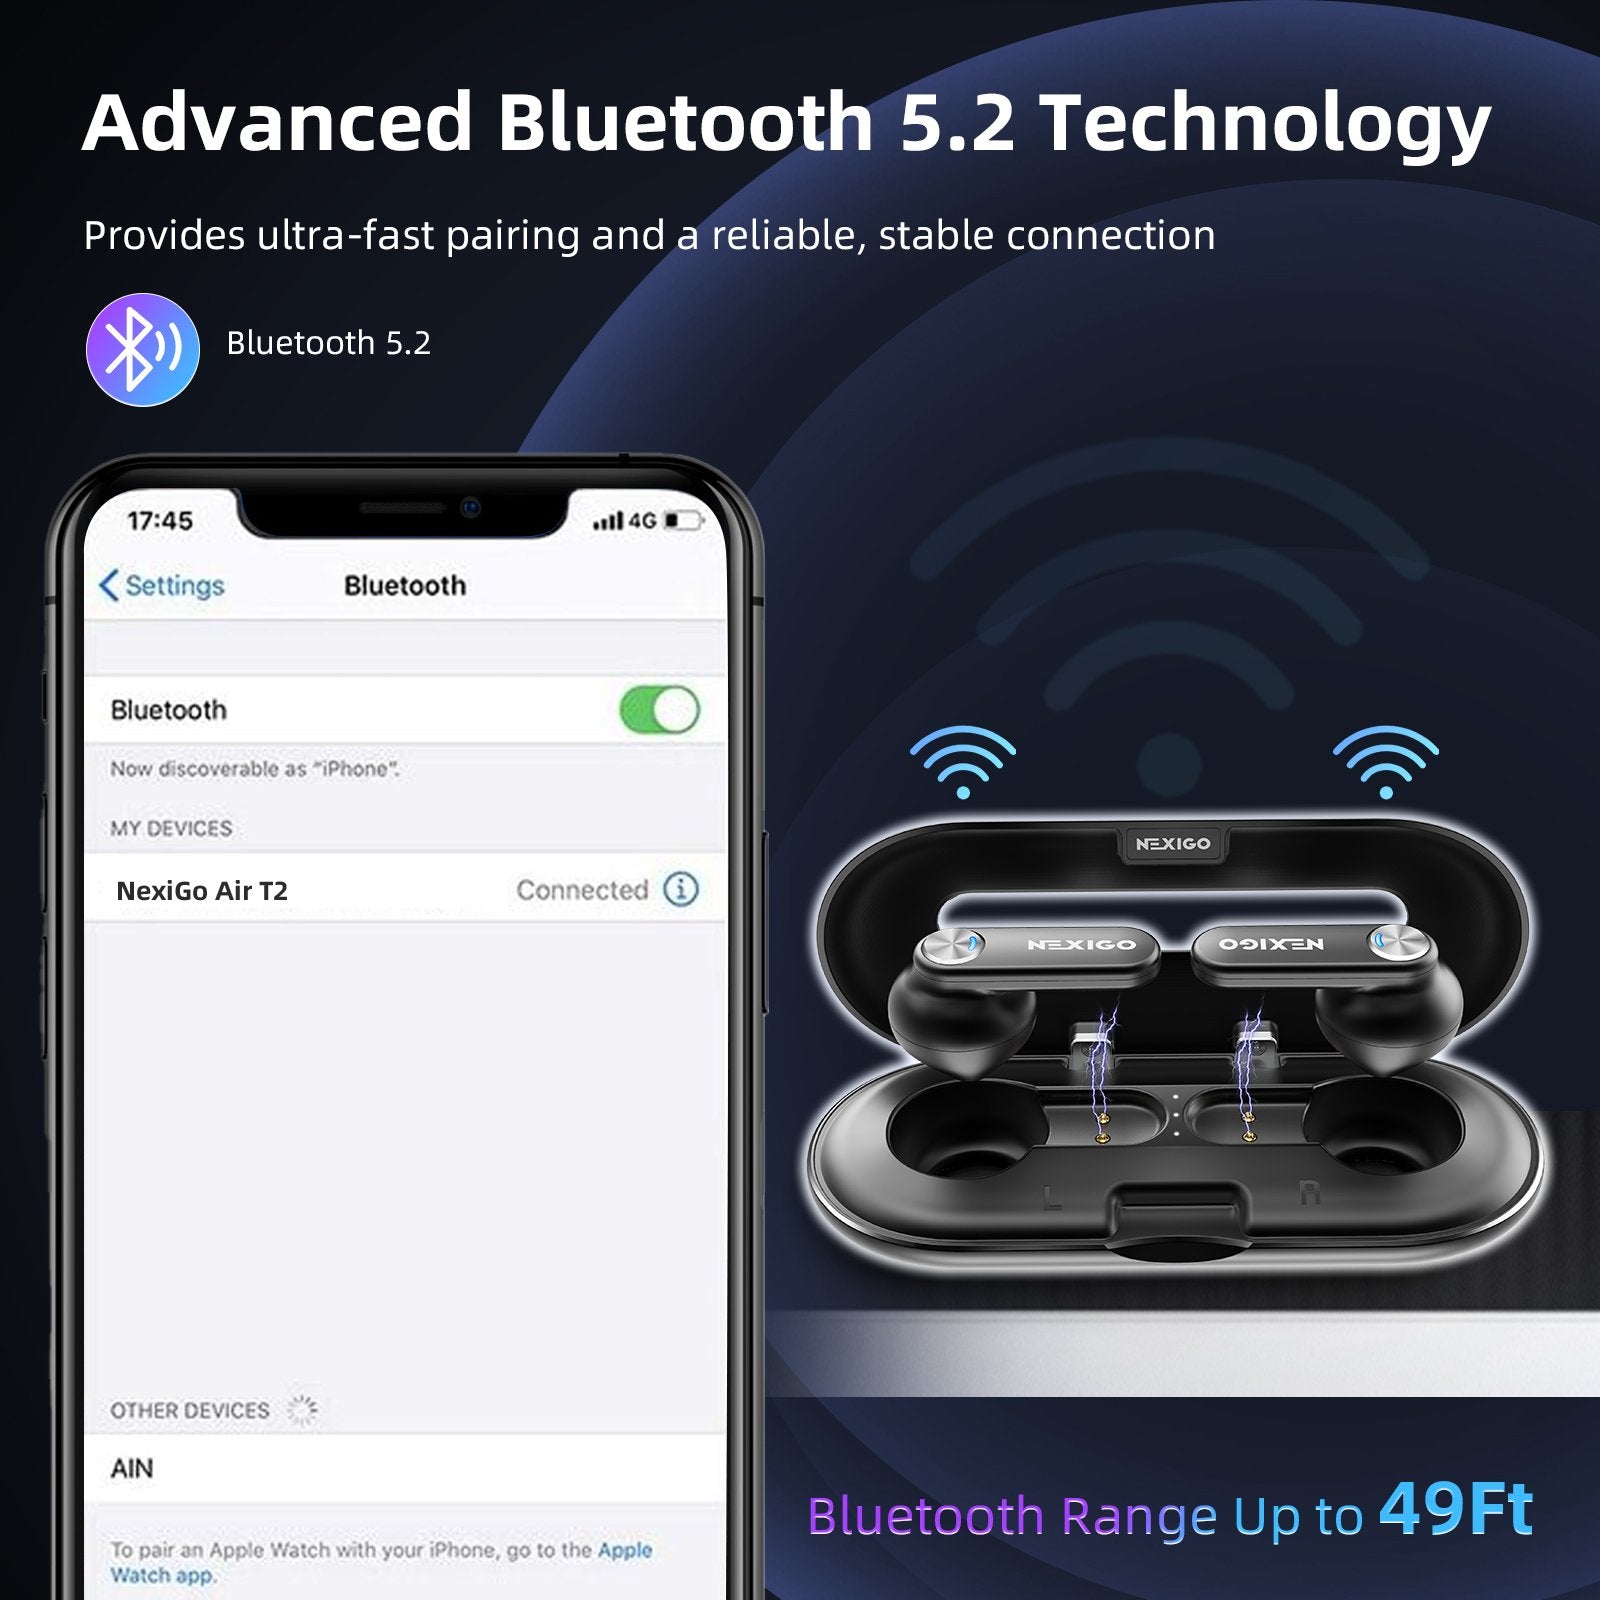 The T2 earphones connect to the phone via Bluetooth 5.2 within 49ft for a fast, stable connection. 